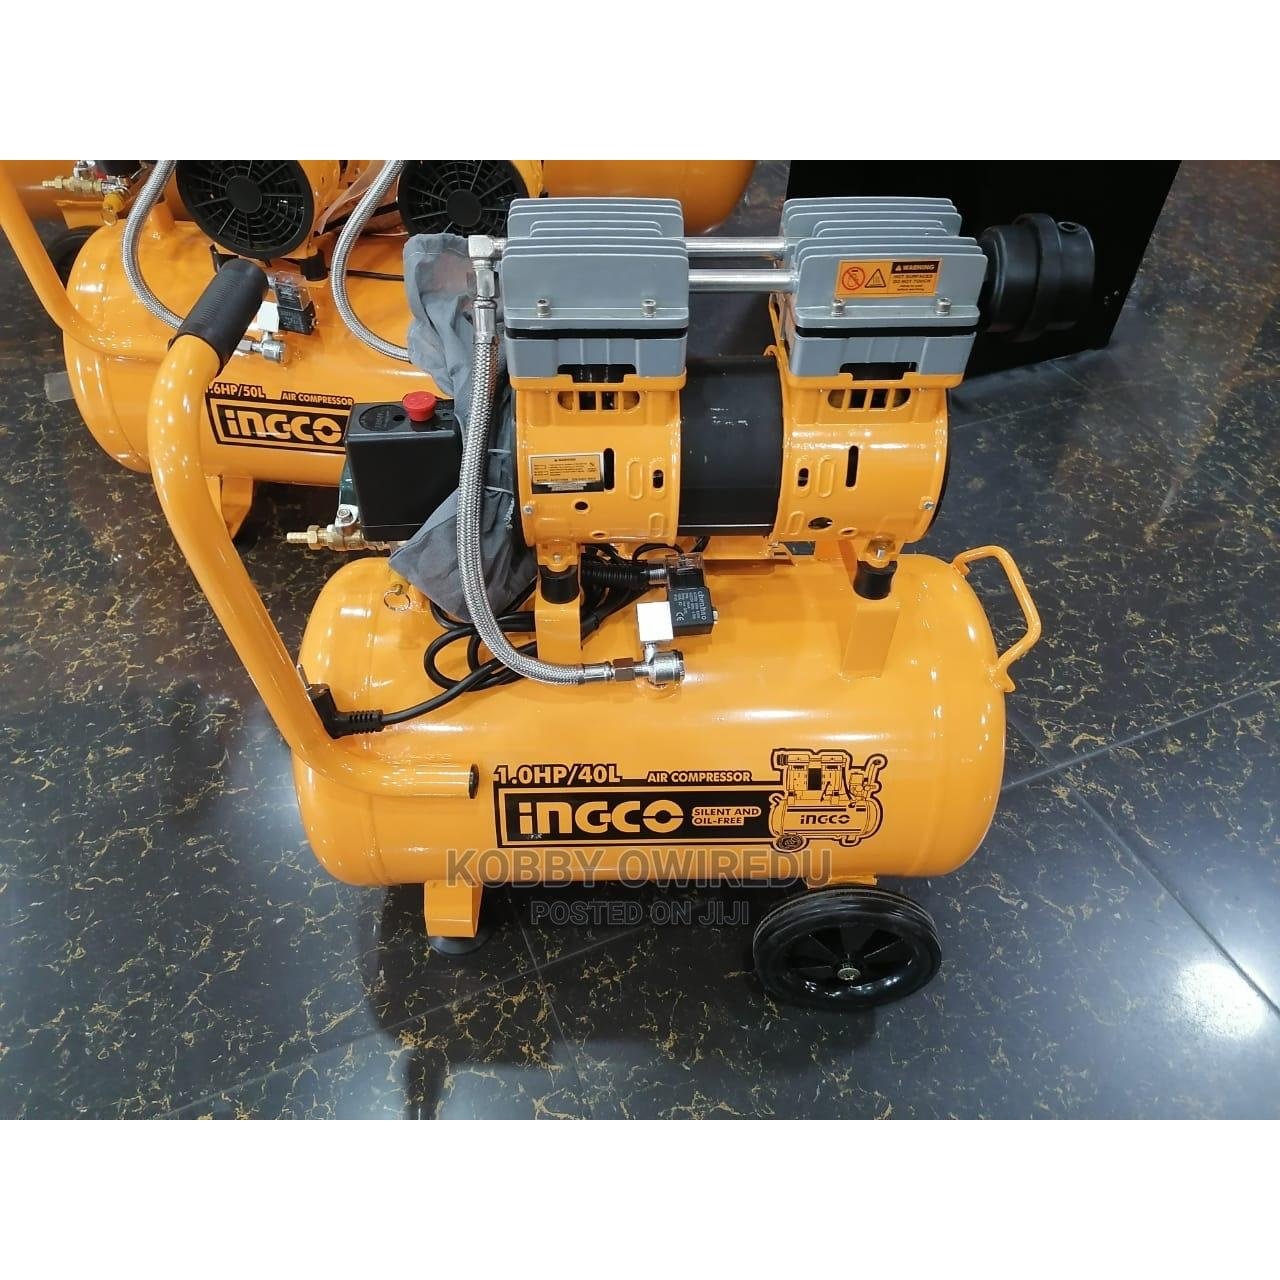 Ingco Silent And Oil Free Air Compressor 1.0HP 40L - ACS175406 | Supply Master | Accra, Ghana Compressor & Air Tool Accessories Buy Tools hardware Building materials